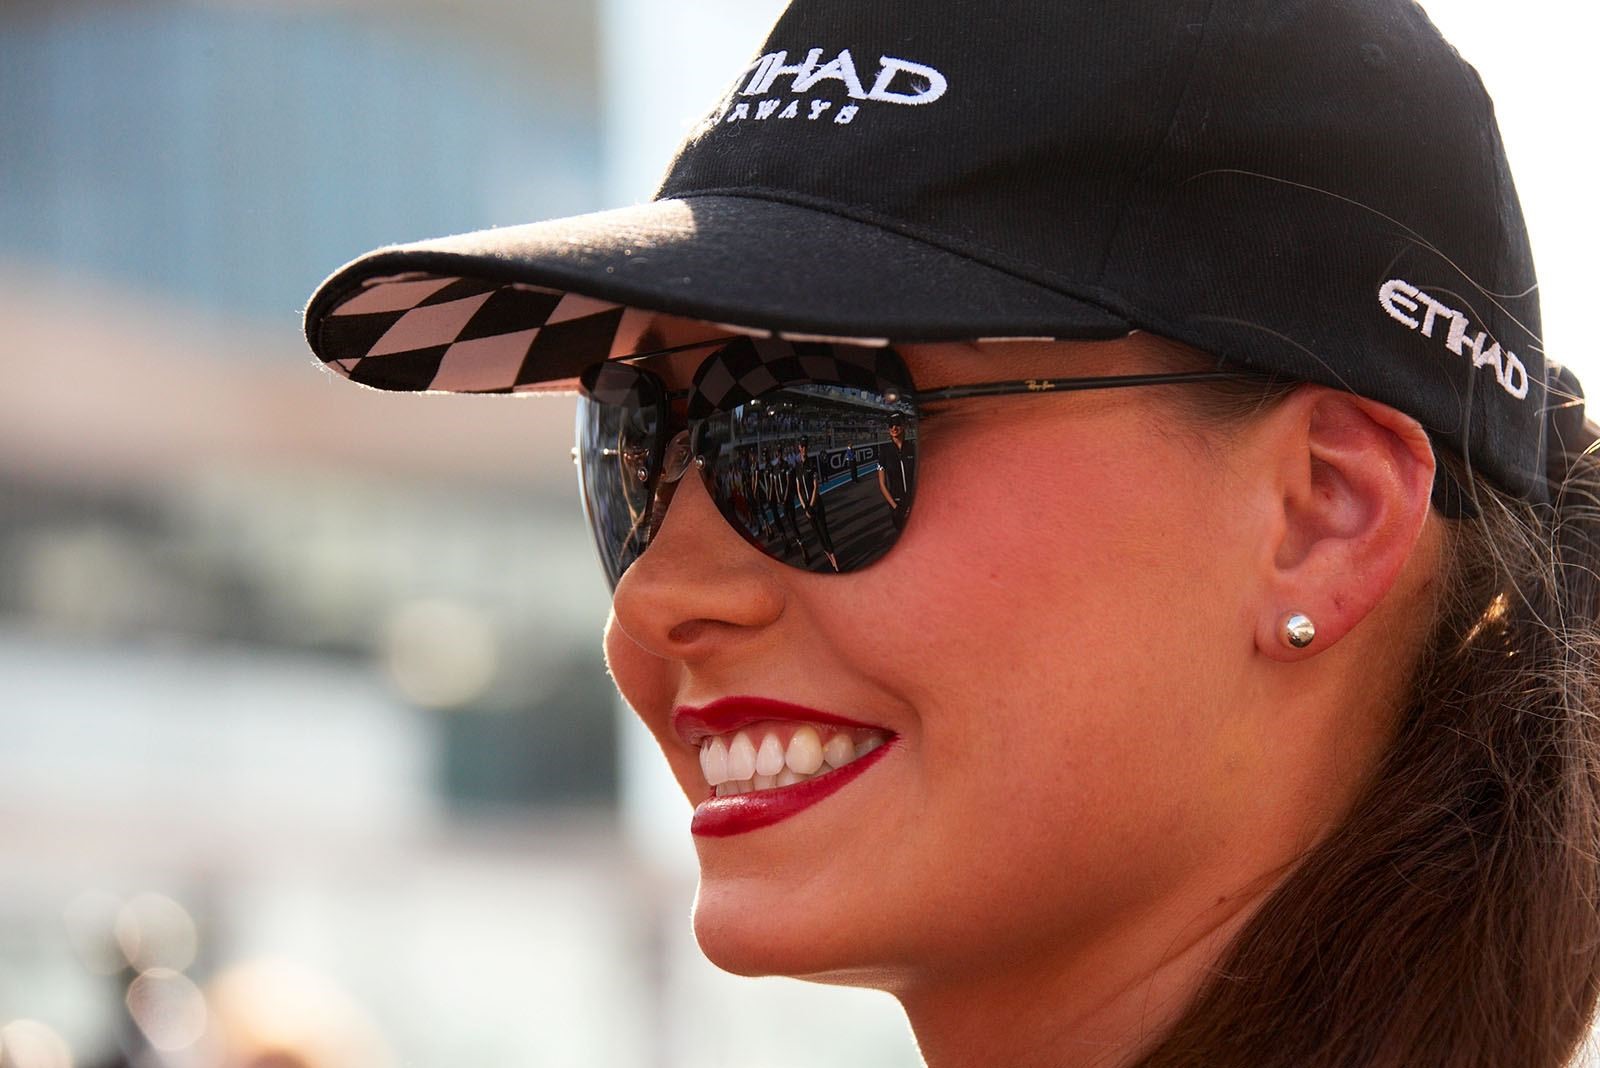 One more grid girl at Abu Dhabi in 2012. 